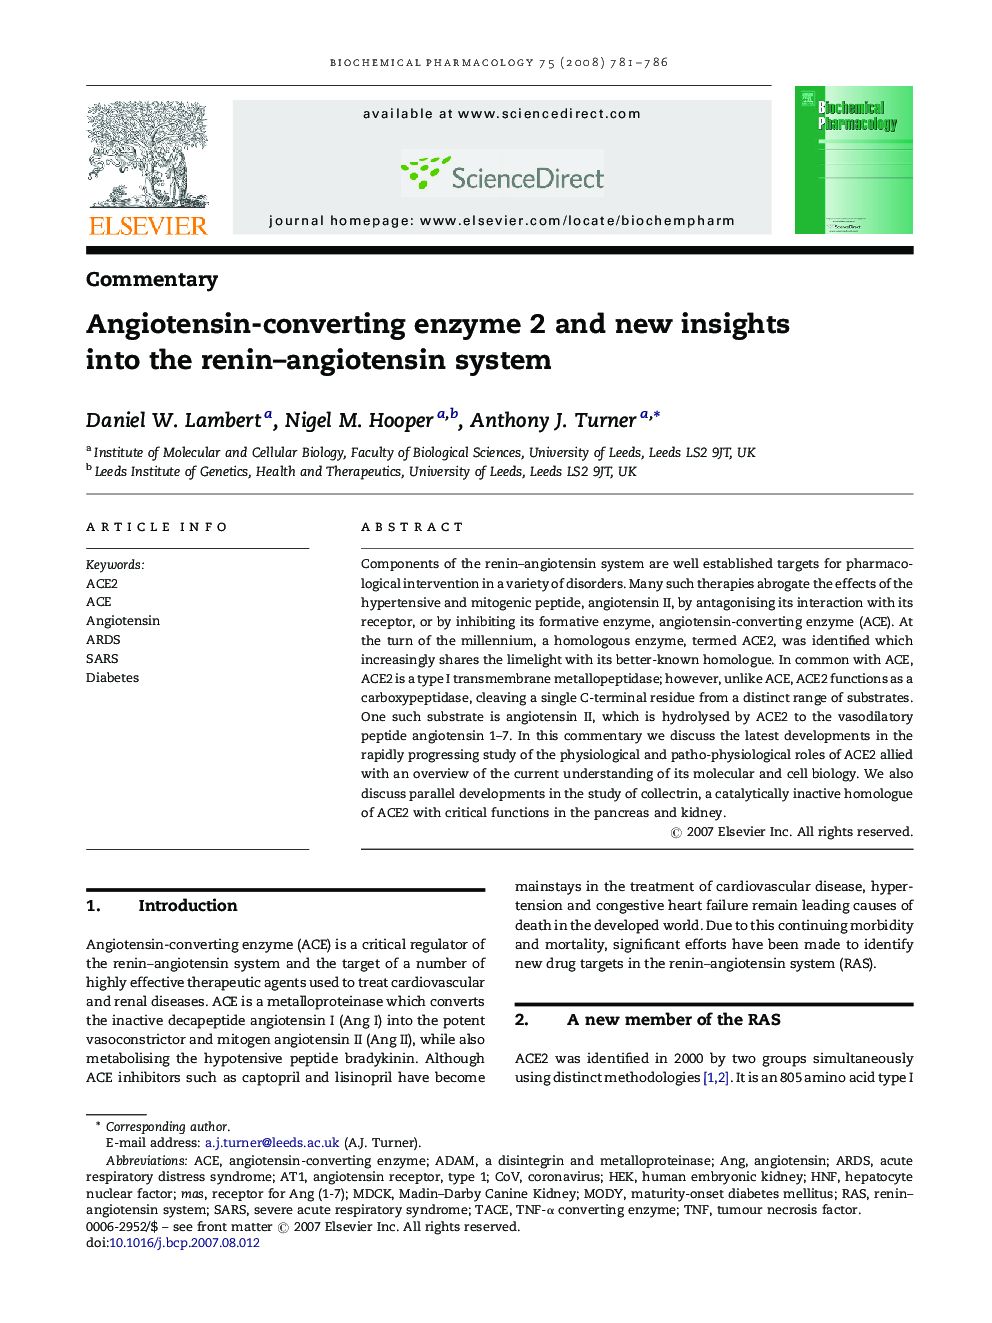 CommentaryAngiotensin-converting enzyme 2 and new insights into the renin-angiotensin system